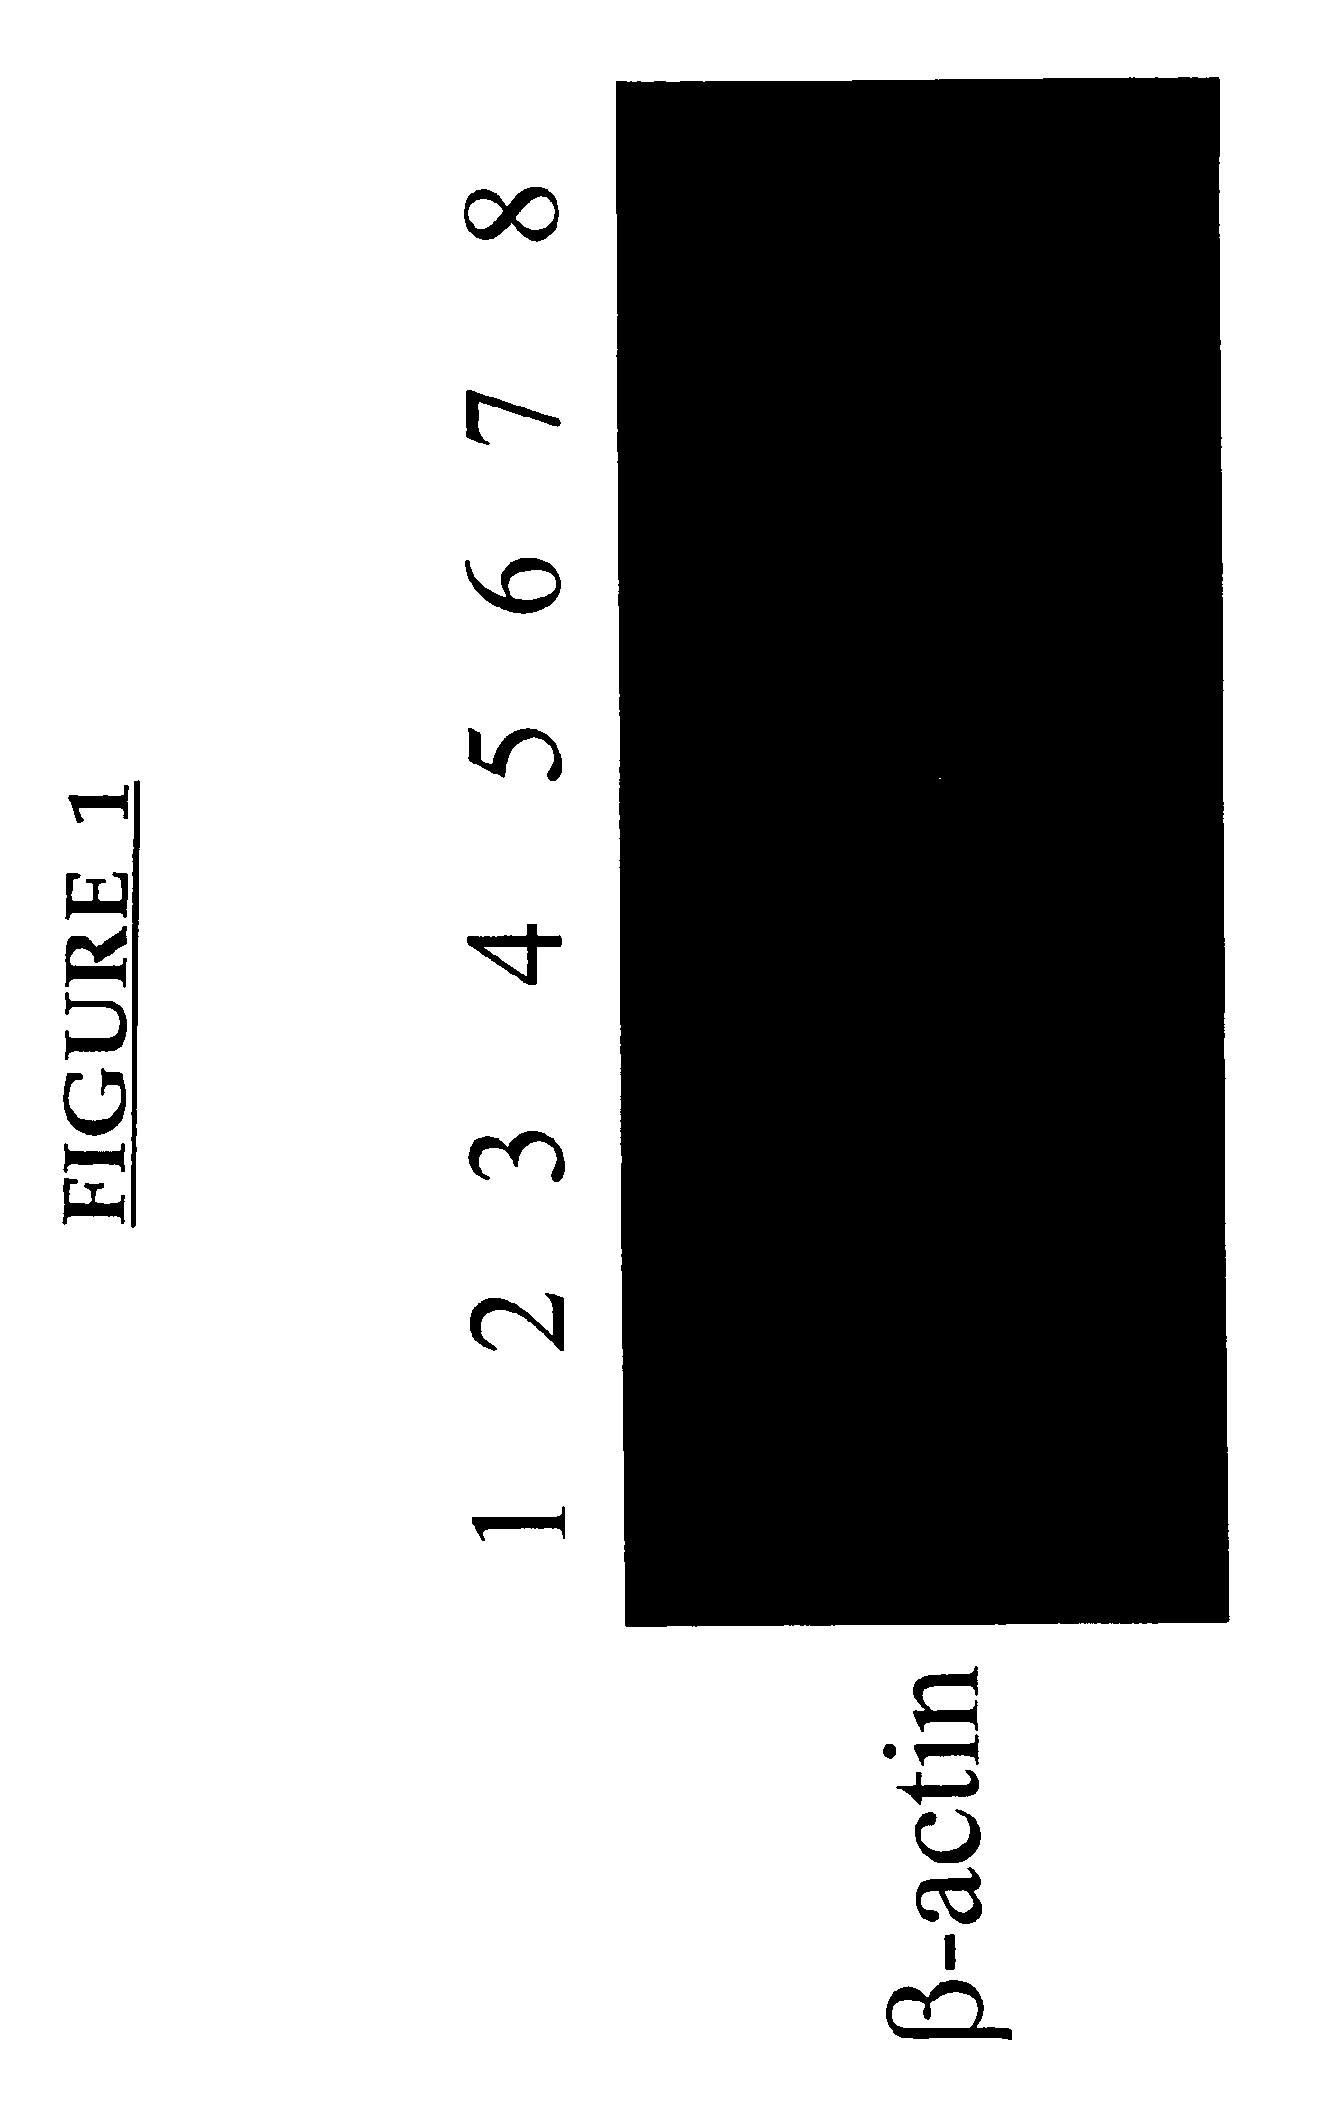 Methods of inhibiting immune response suppression by administering antibodies to OX-2